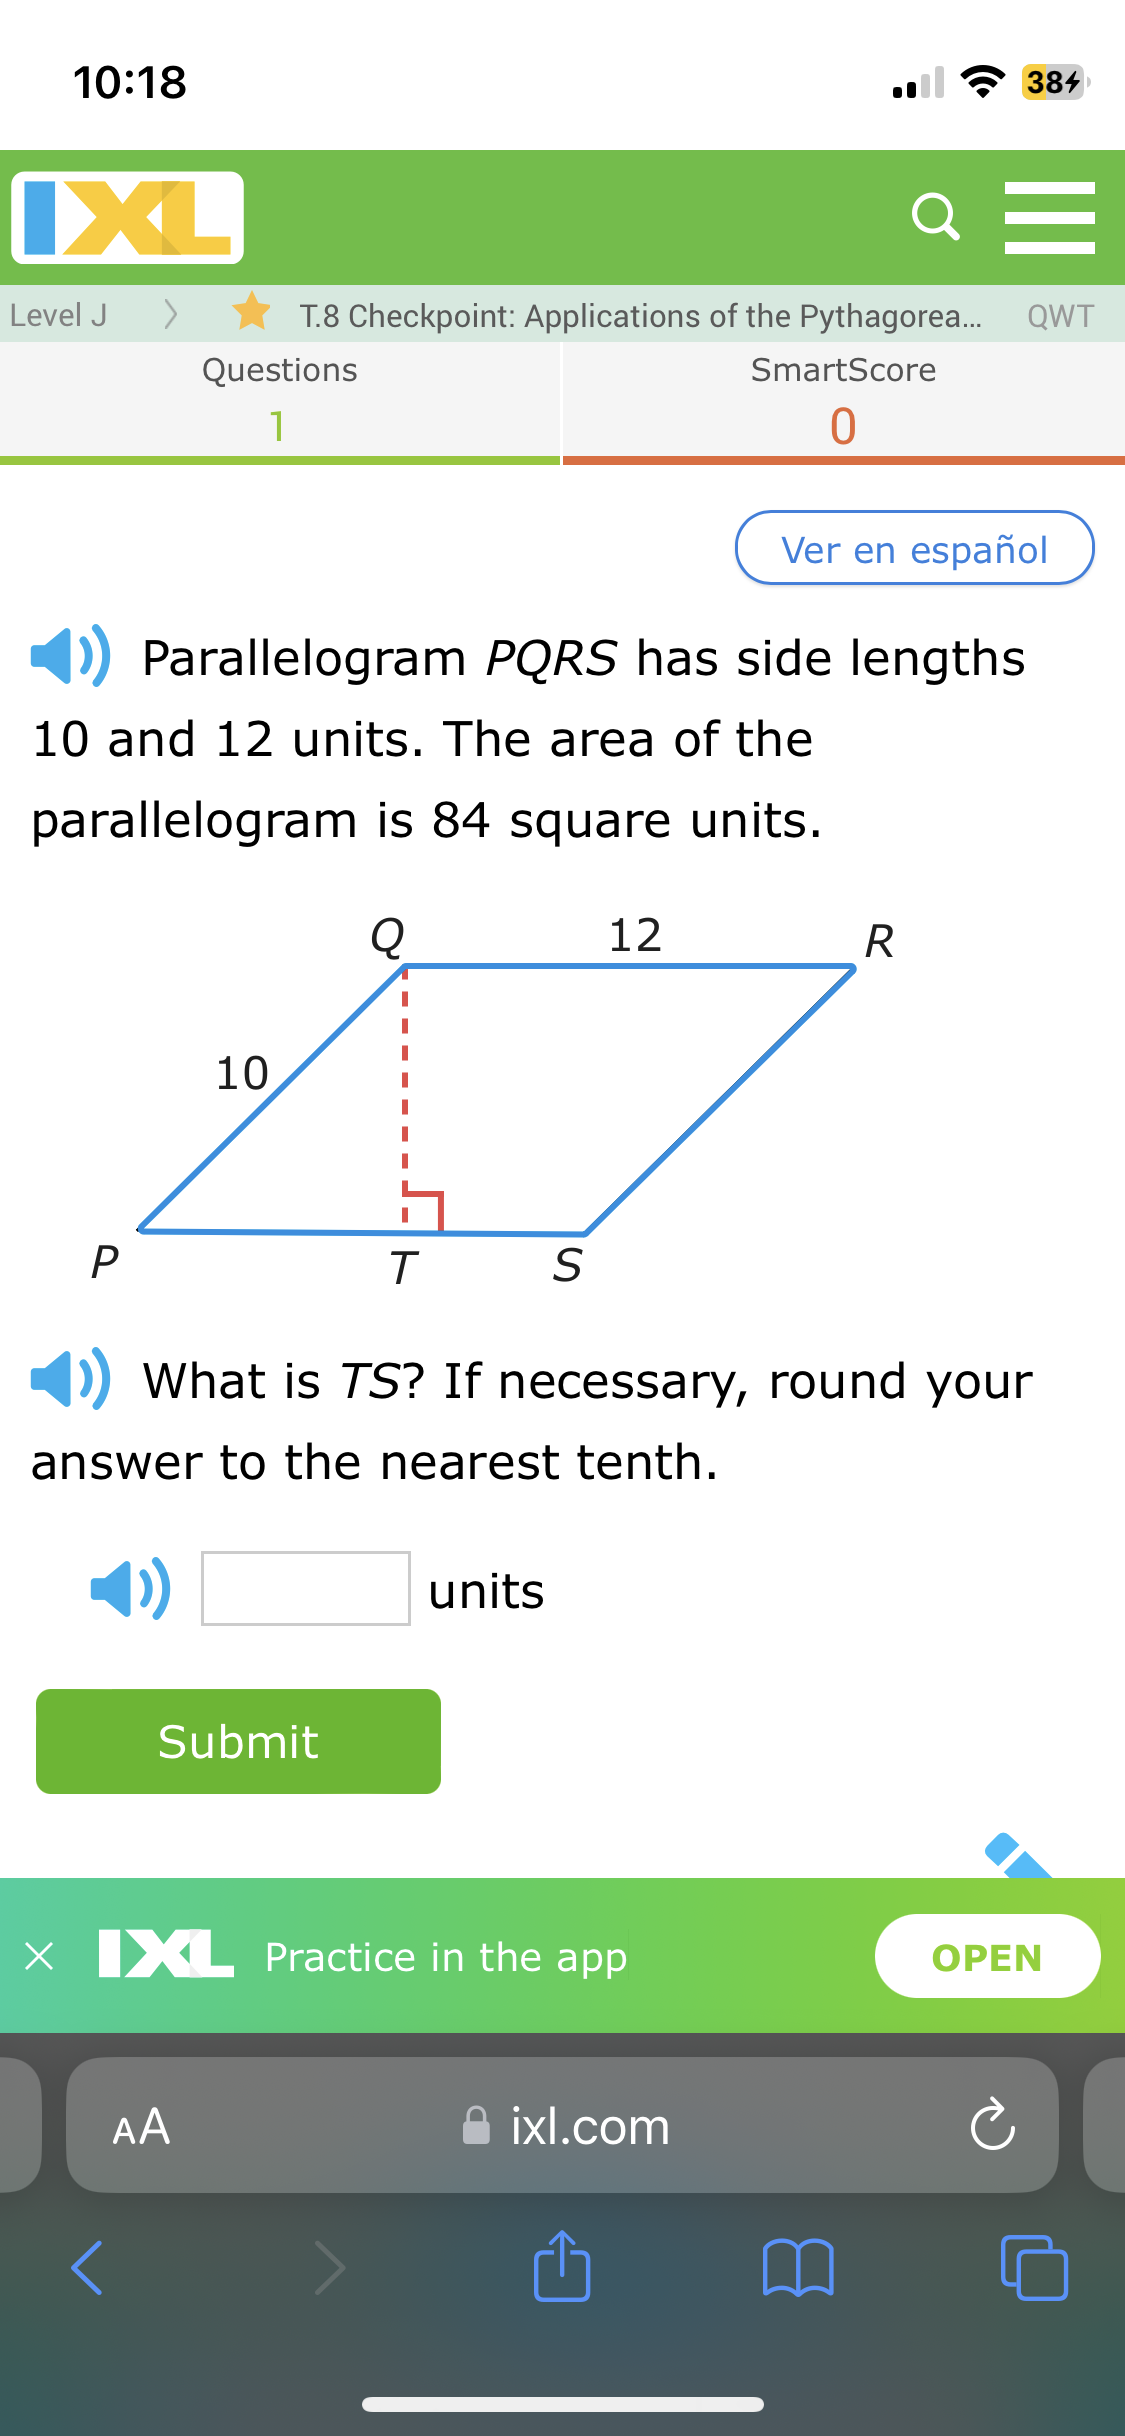 10:18
IXL
Level J
T.8 Checkpoint: Applications of the Pythagorea...
Questions
1
SmartScore
0
384
=
QWT
Ver en español
Parallelogram PQRS has side lengths
10 and 12 units. The area of the
parallelogram is 84 square units.
10
Q
12
R
P
T
S
What is TS? If necessary, round your
answer to the nearest tenth.
units
Submit
x XL Practice in the app
>
AA
ixl.com
OPEN